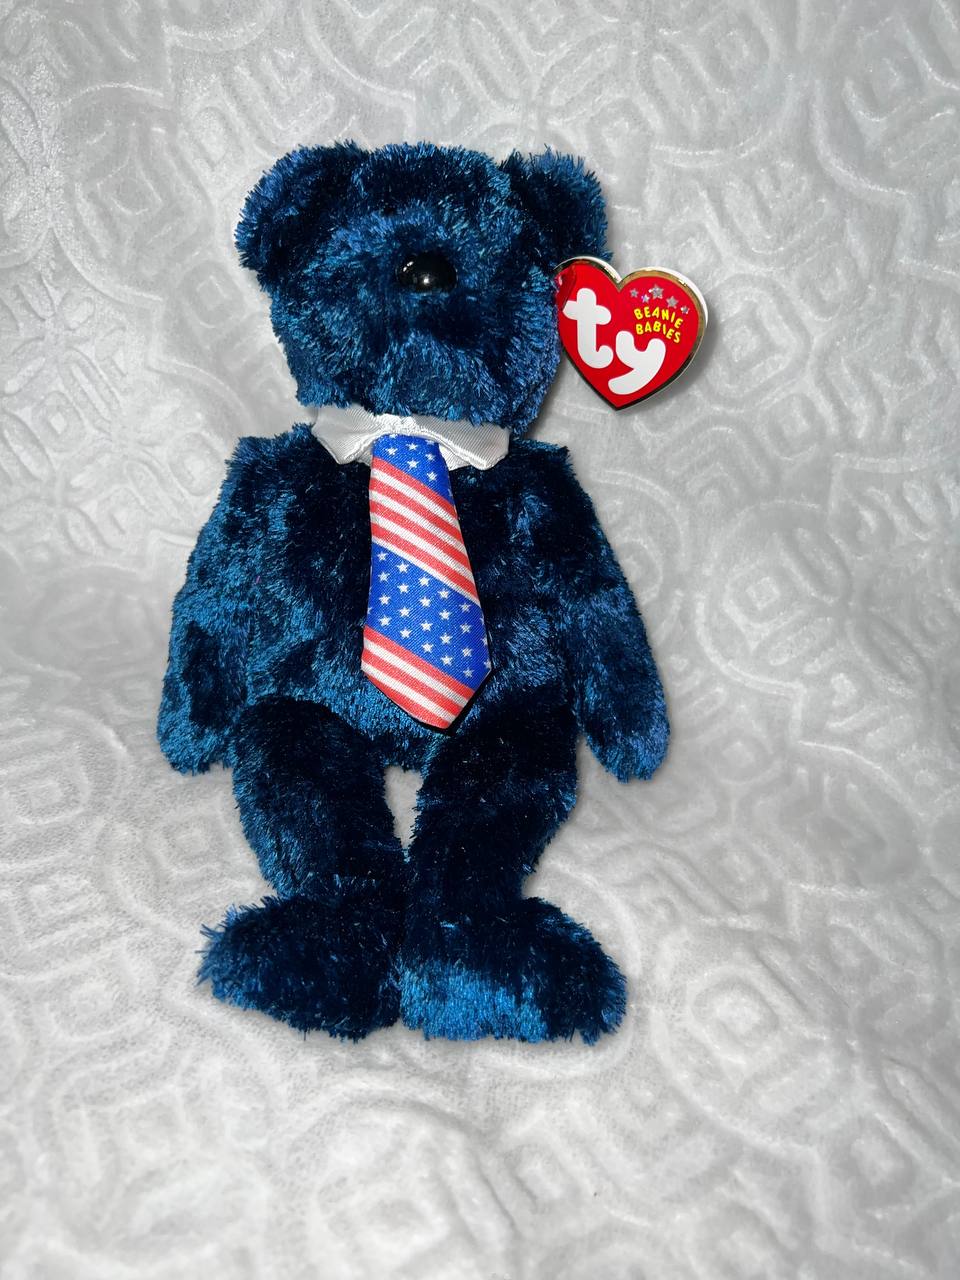 *RARE* MINT Pops Beanie Baby 2001 With Tag